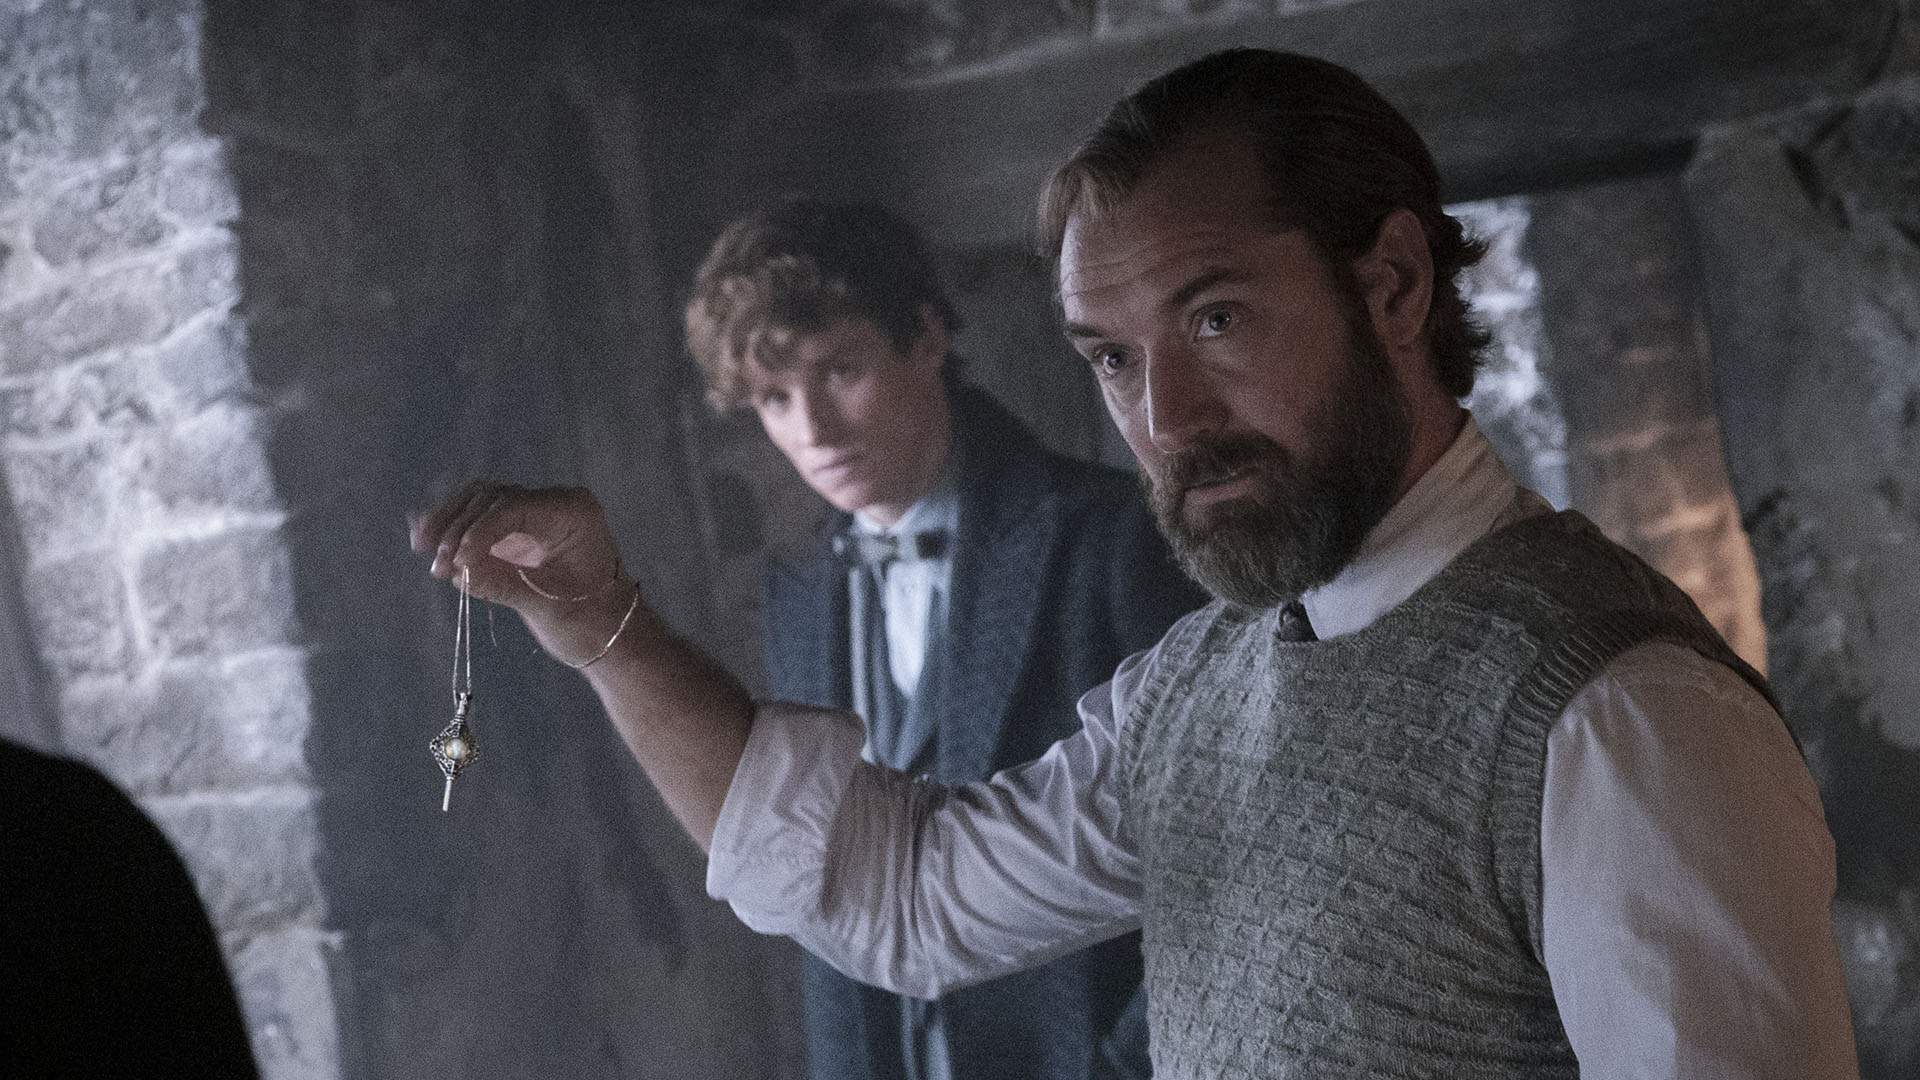 Jude Law and Mads Mikkelsen Face Off in the New 'Fantastic Beasts: The Secrets of Dumbledore' Trailer